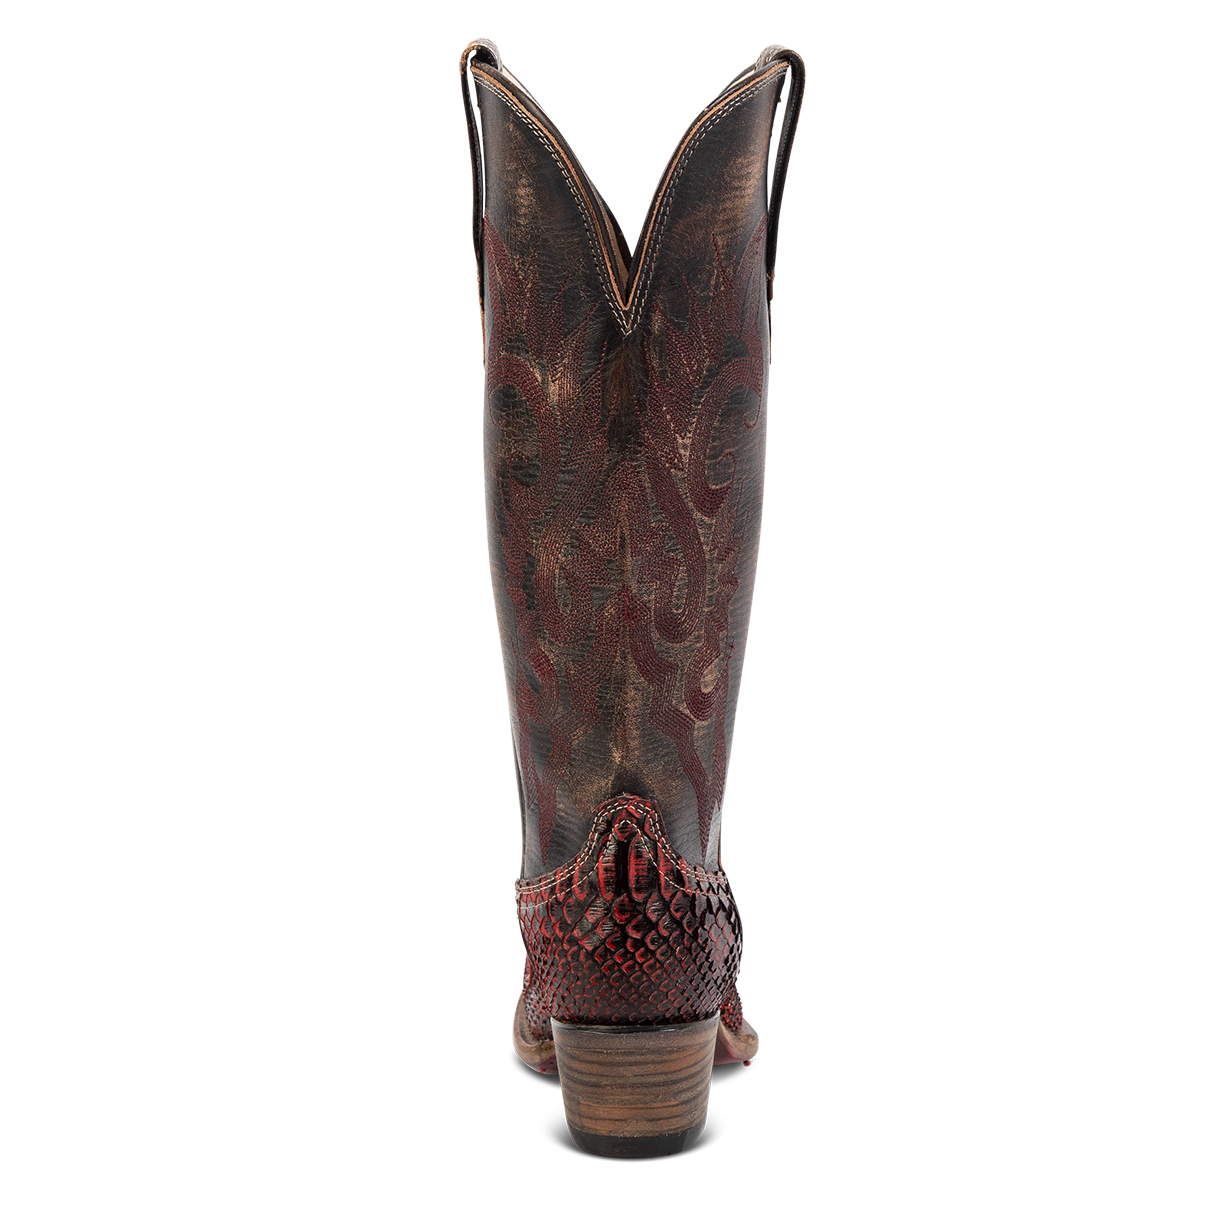 Back view showing back dip and leather heel with western stitch detailing on FREEBIRD women's Woodland wine python multi leather boot